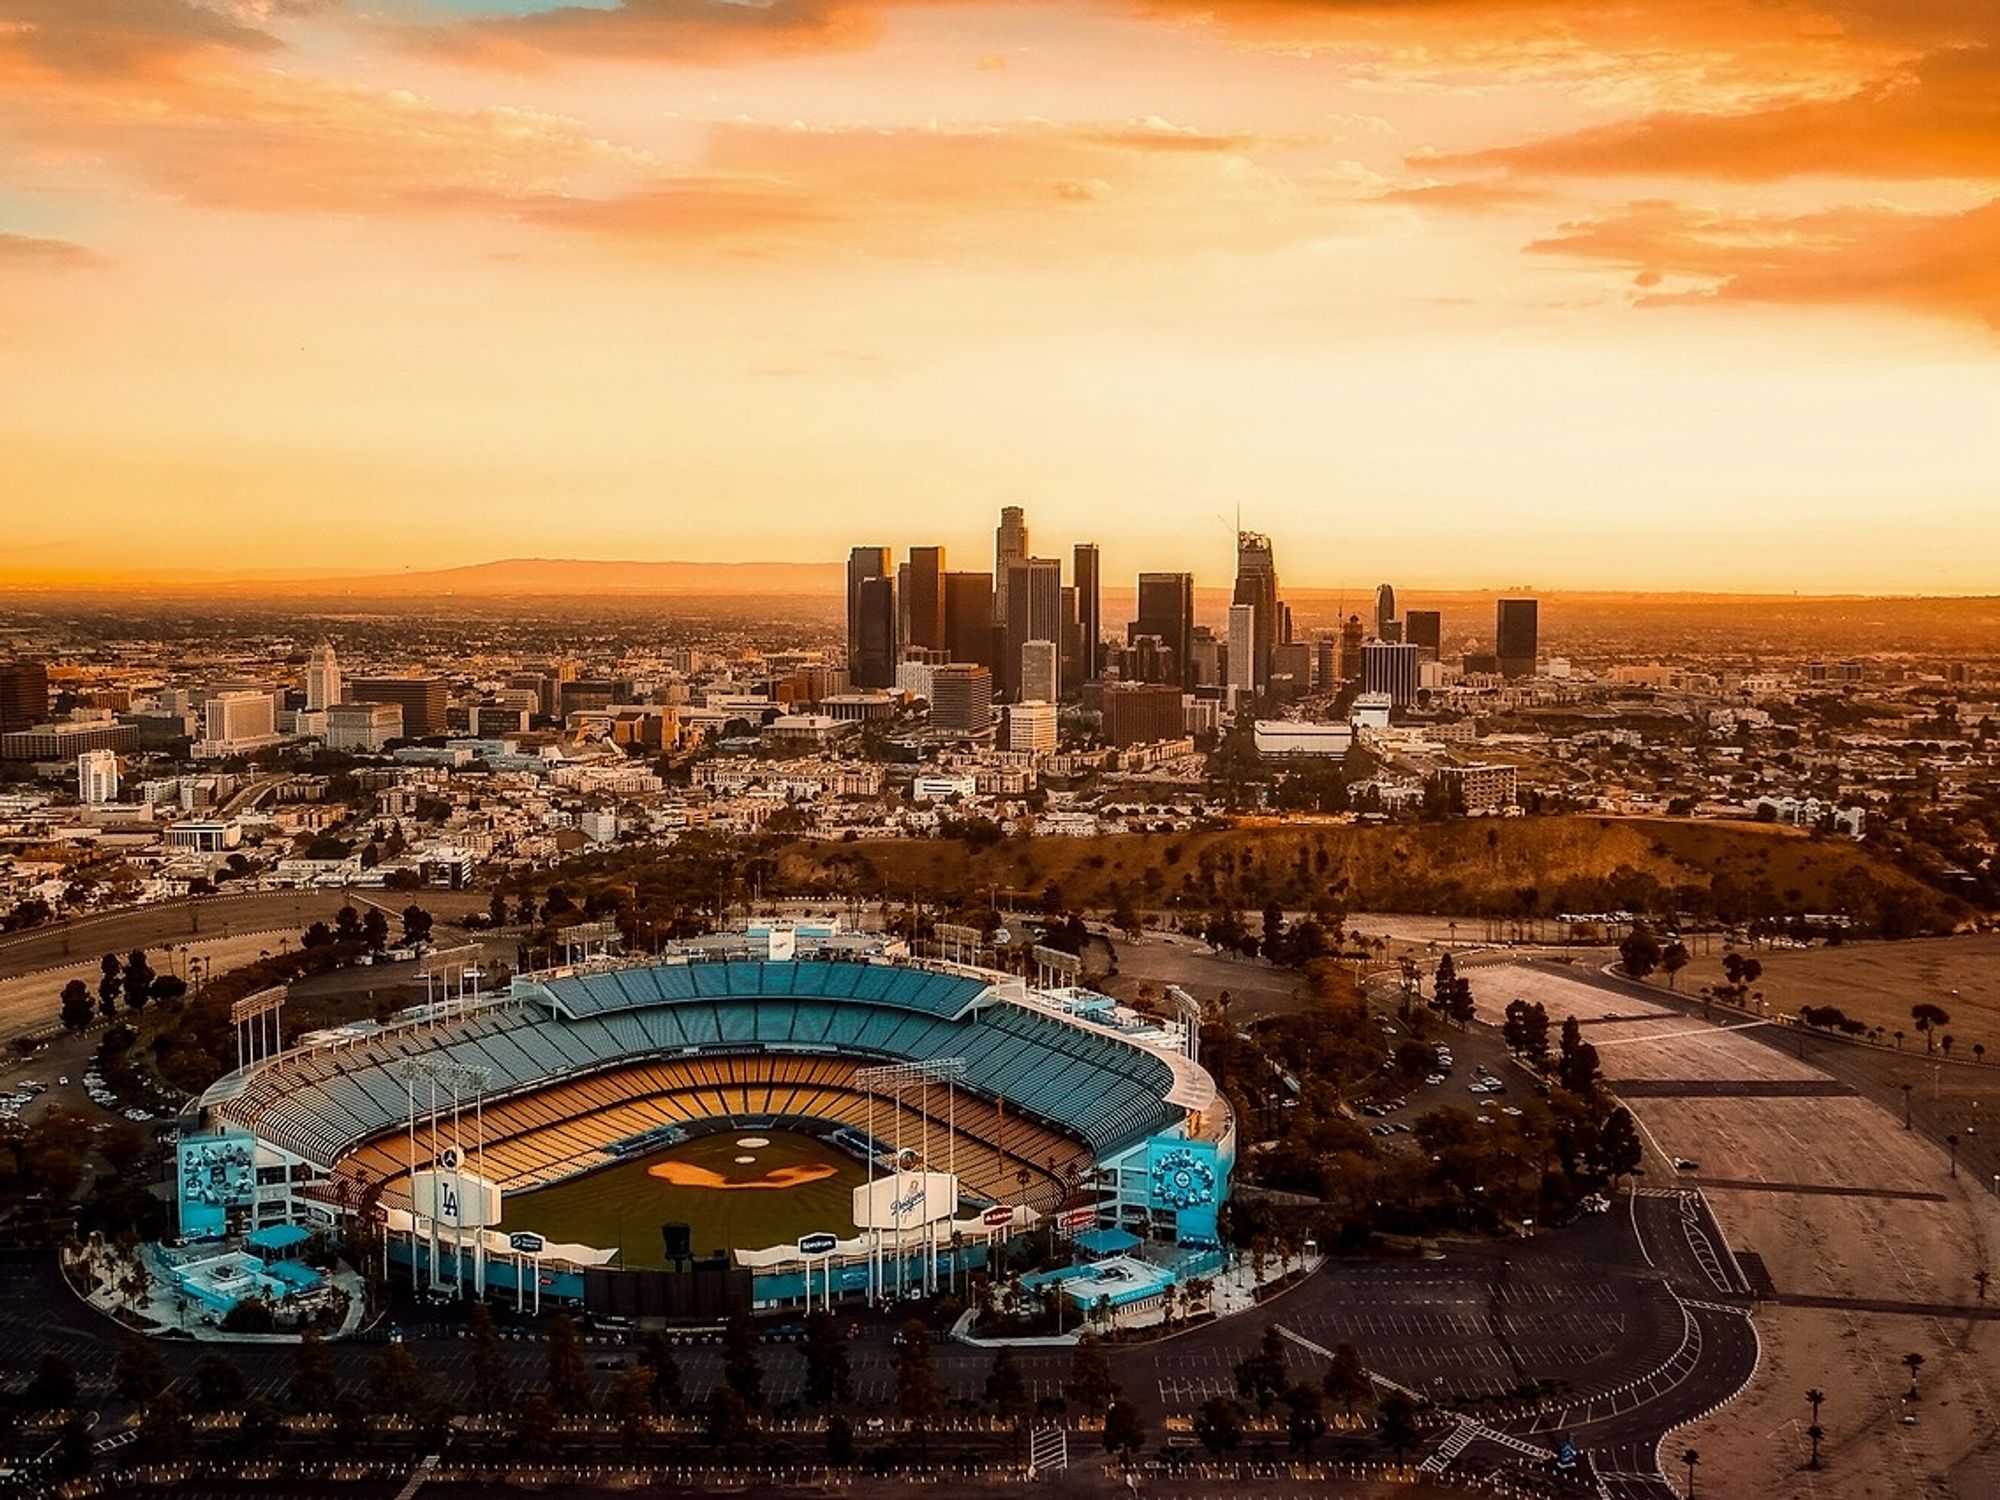 With a Crowd of Diverse Faces, Dodger Stadium Stands Out - The New